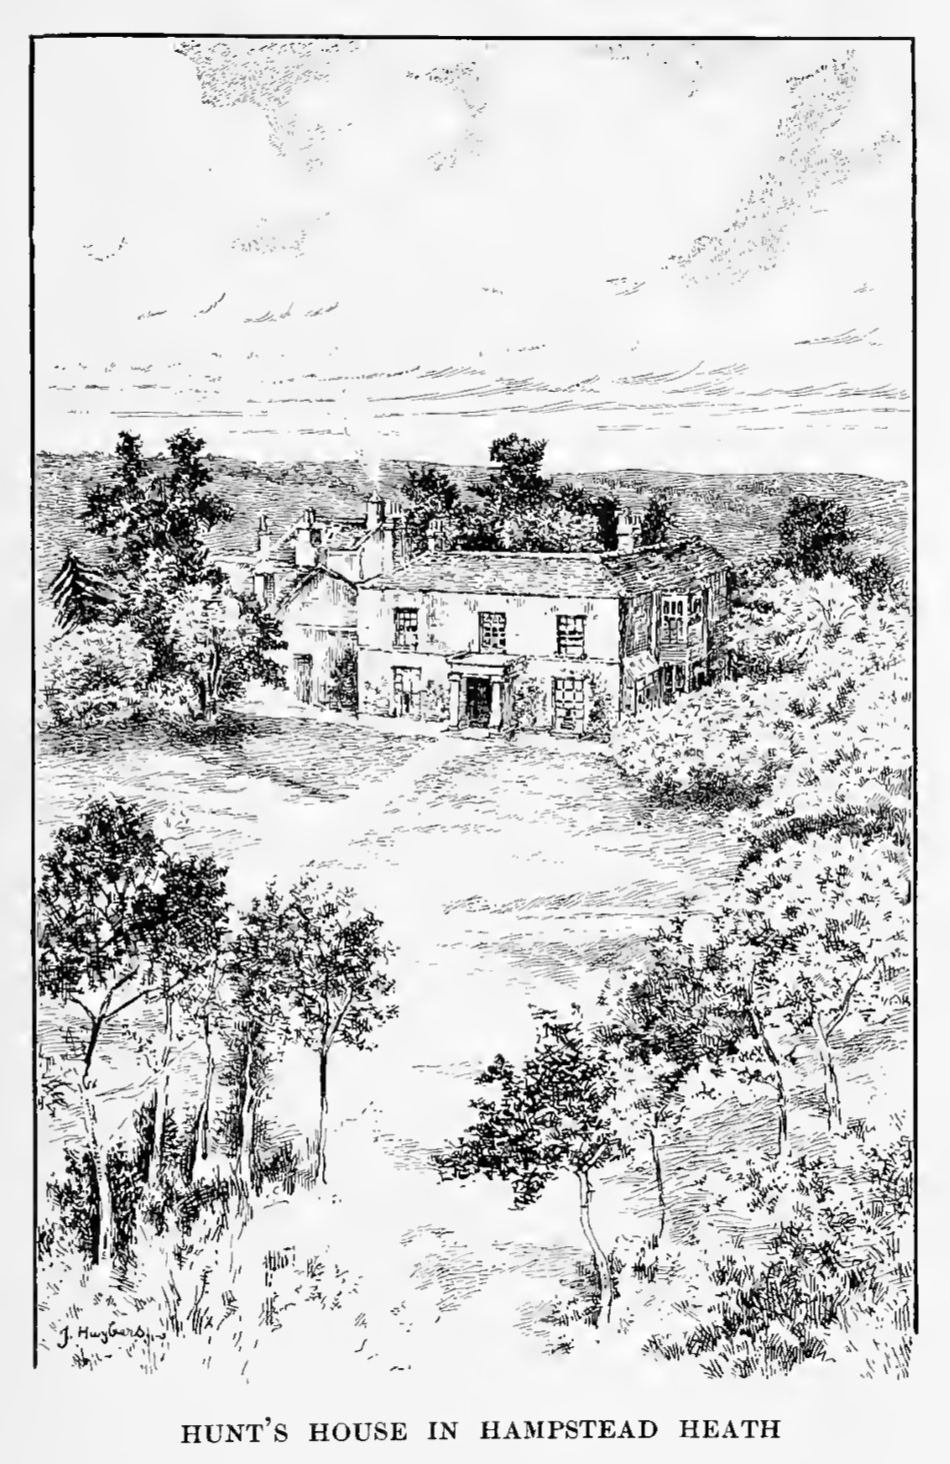 From a drawing by John Huybers, in Hancock’s 1908 biography. Click to enlarge.